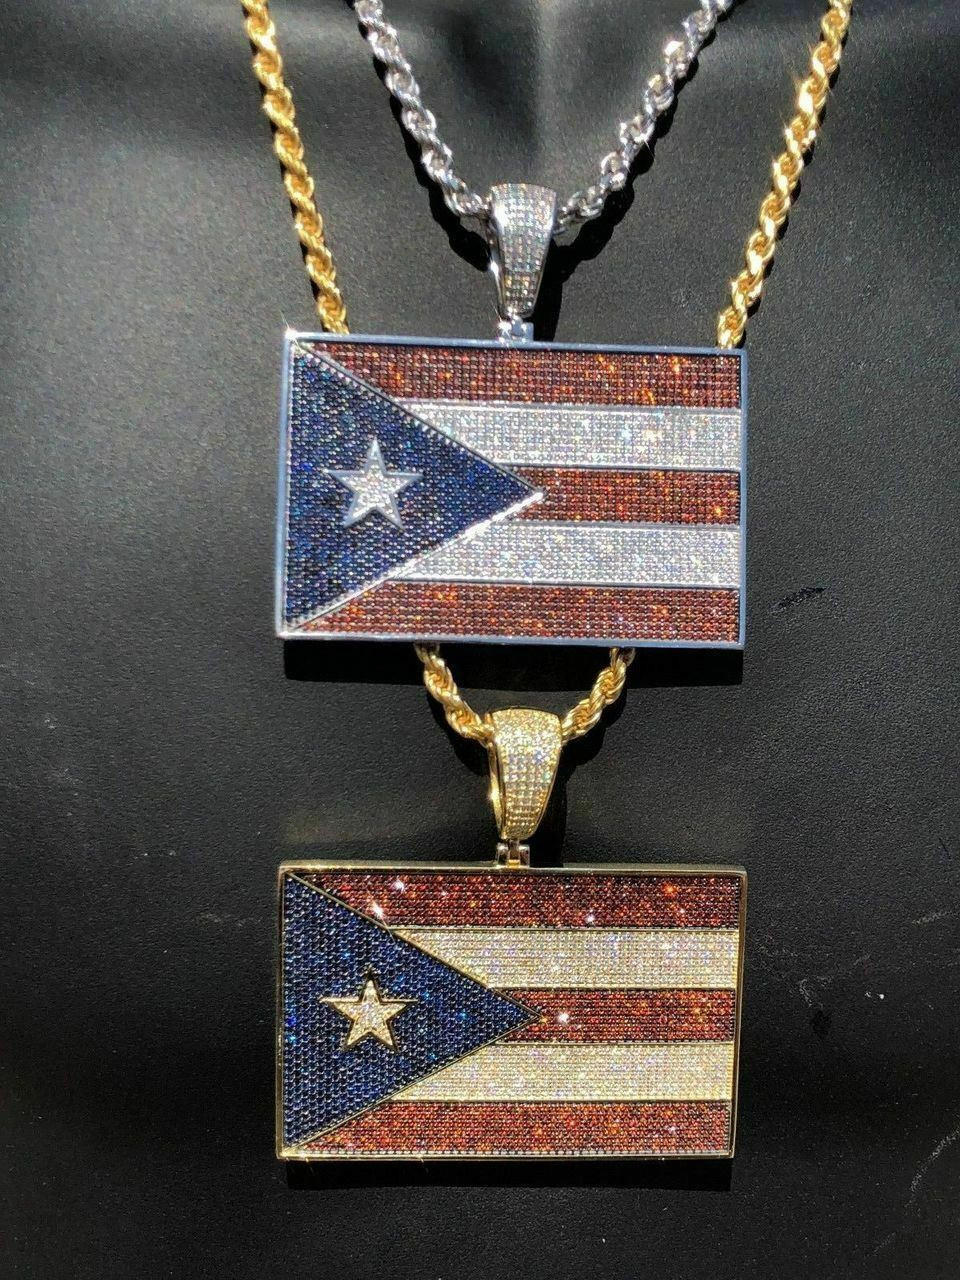 Puerto Rico Necklace,Gold Filled Puerto Rico Necklace,Patriotic Necklace,Cadena  de Puerto Rico, Puerto Ricican Flag Necklace